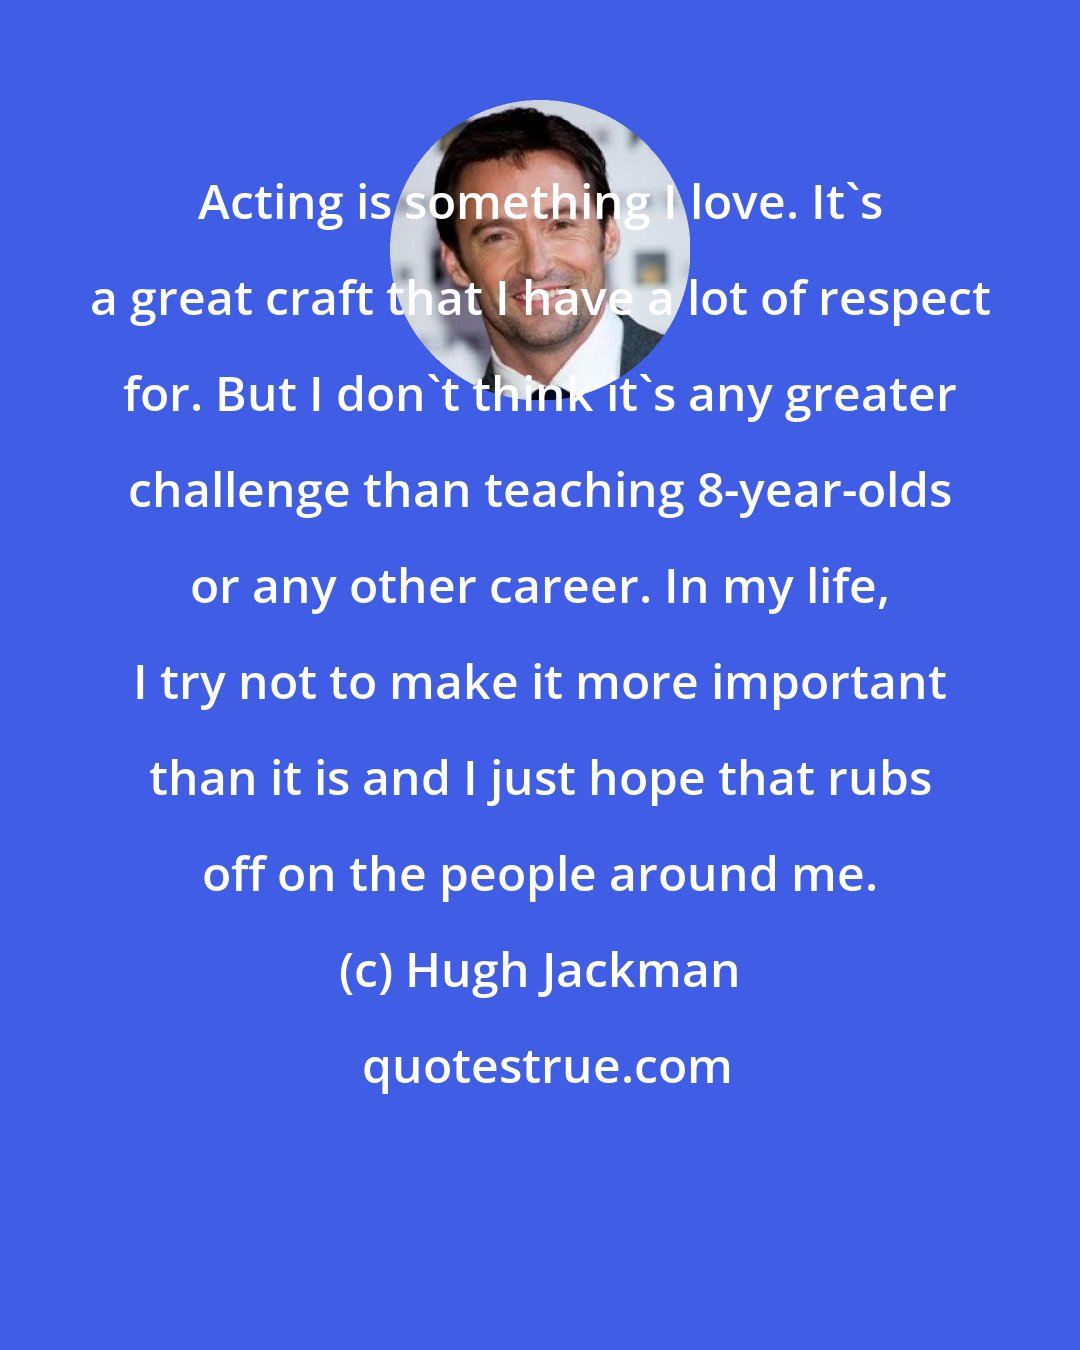 Hugh Jackman: Acting is something I love. It's a great craft that I have a lot of respect for. But I don't think it's any greater challenge than teaching 8-year-olds or any other career. In my life, I try not to make it more important than it is and I just hope that rubs off on the people around me.